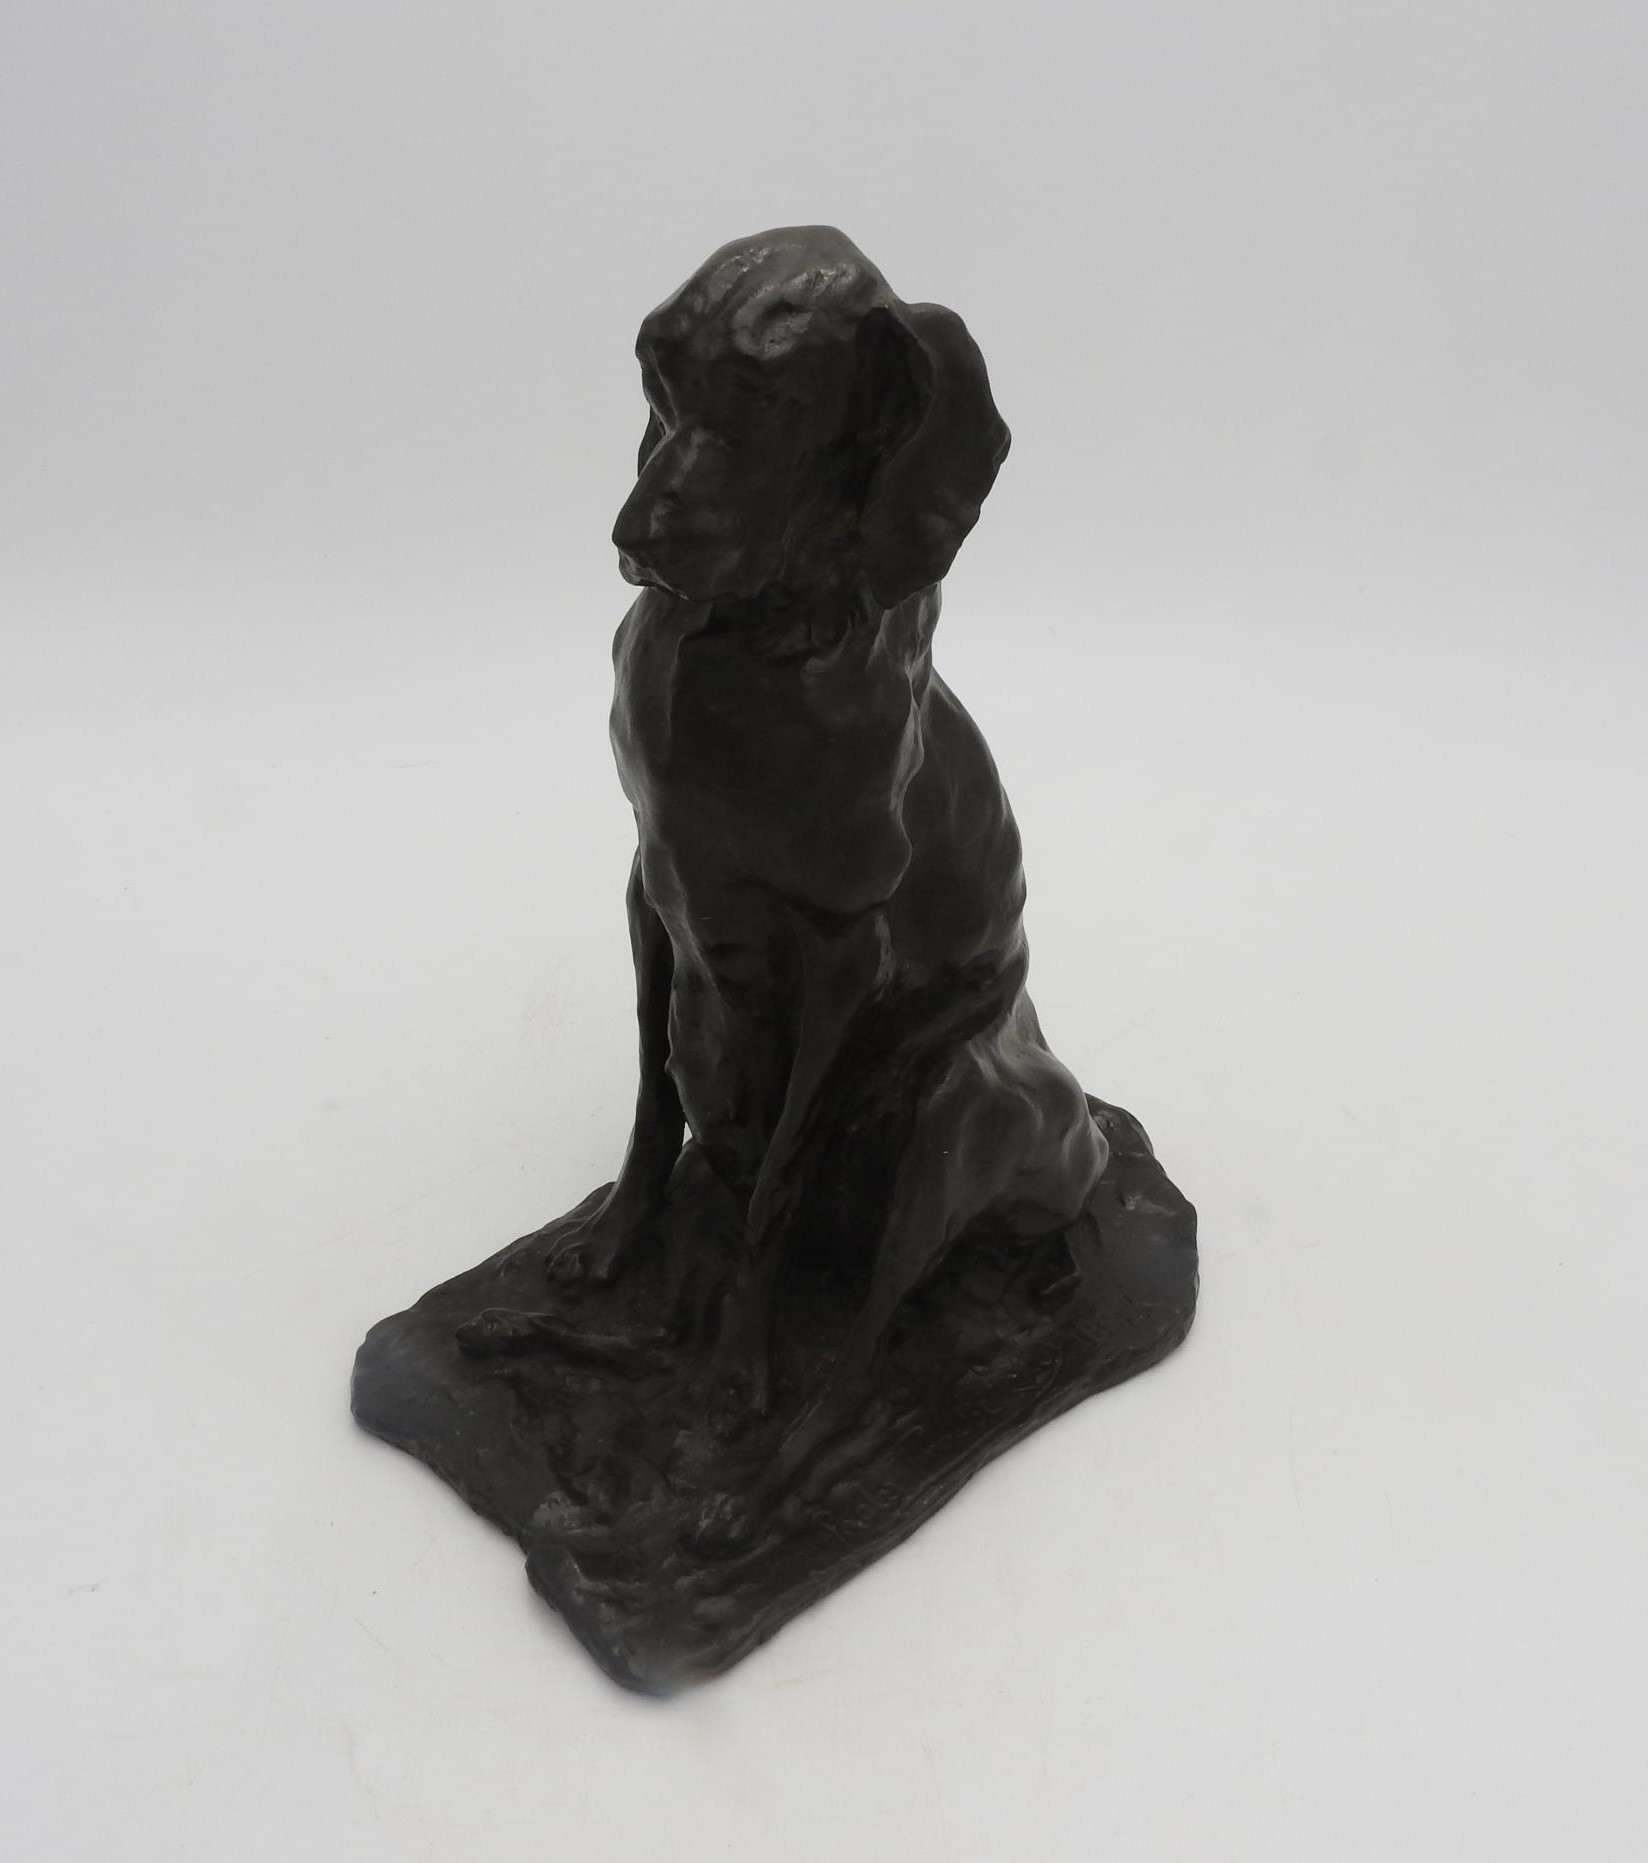 A BRONZE FIGURE OF SEATED DOG SIGNED AND DATED PAOLO TROUBETZKOY 1893, dark brown patina, 25 cm high - Image 3 of 5